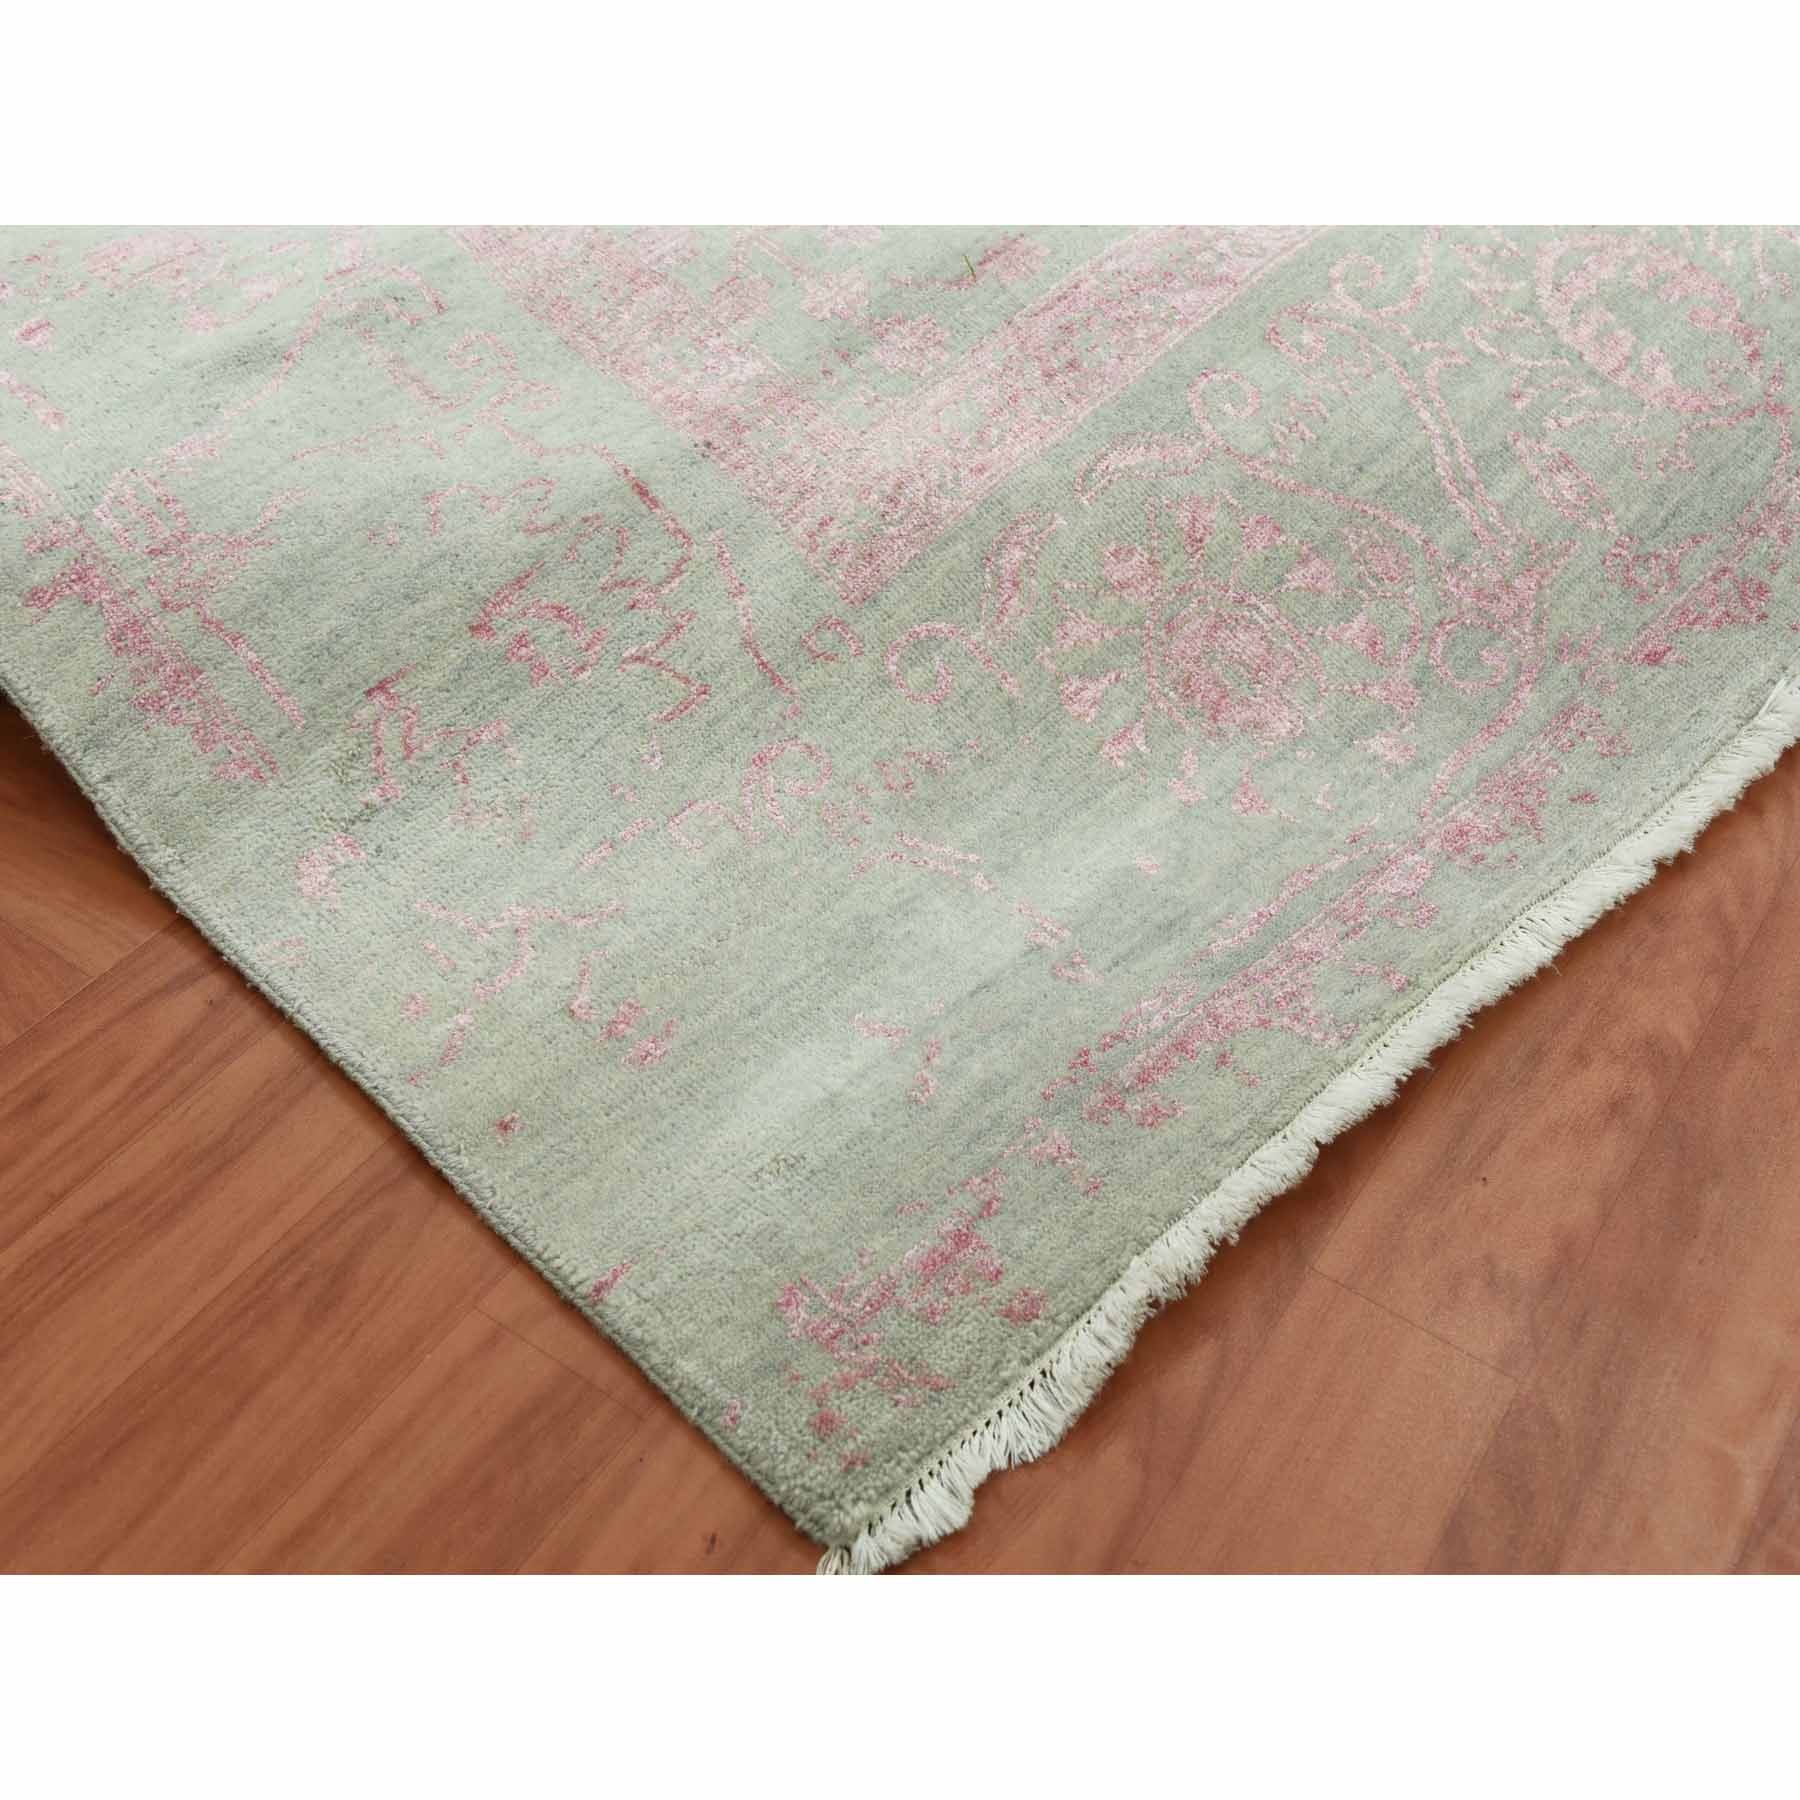 9'x11'10" Sage Gray with Touches of Pink, Broken Erased Persian Design Wool and Silk Hand Woven, Oriental Rug 